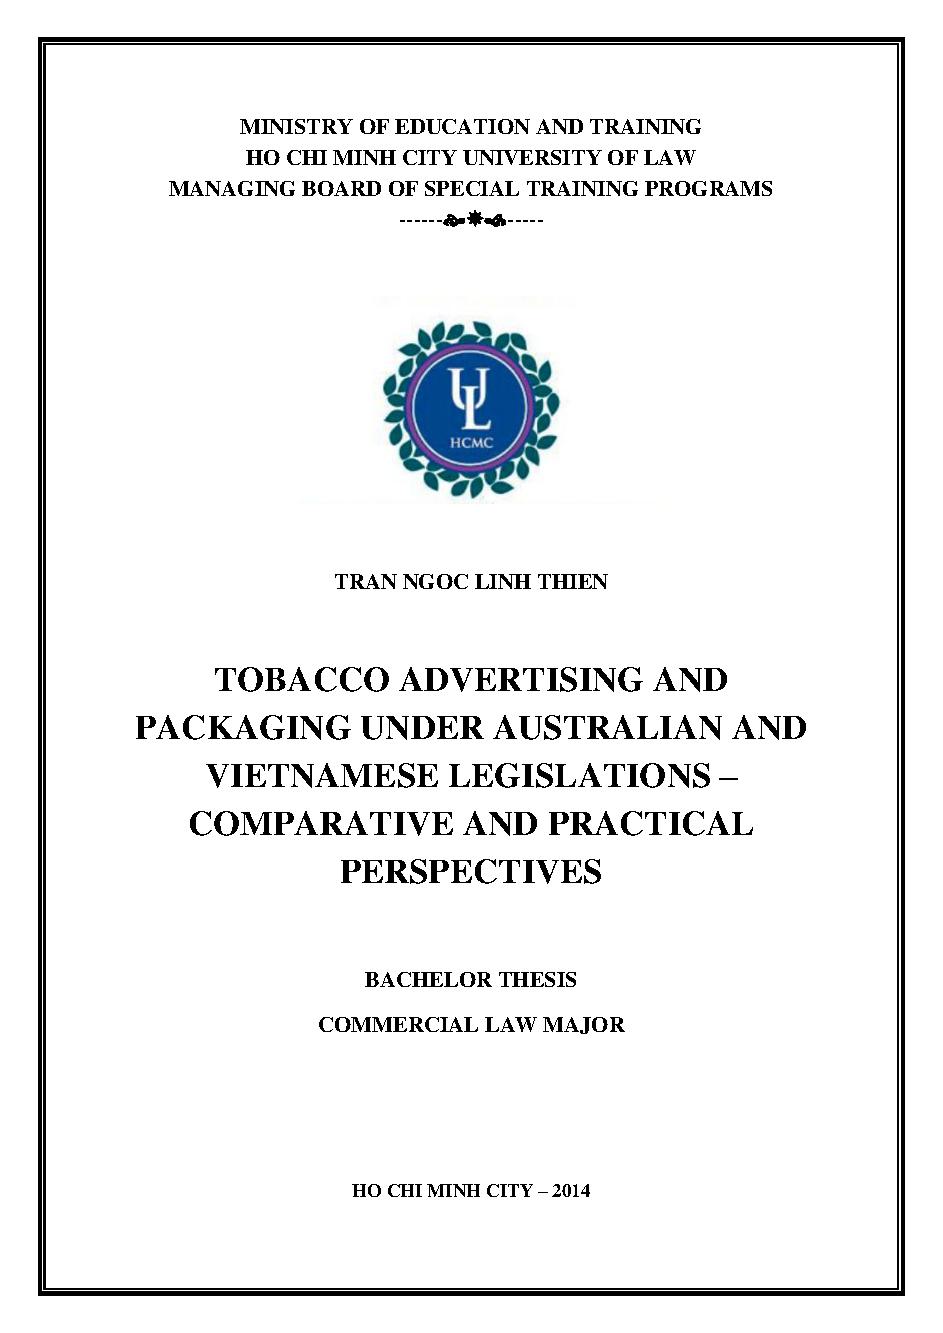 Tobacco advertising and packaging under Australian and Vietnamese legislations - comparative and practical perspectives